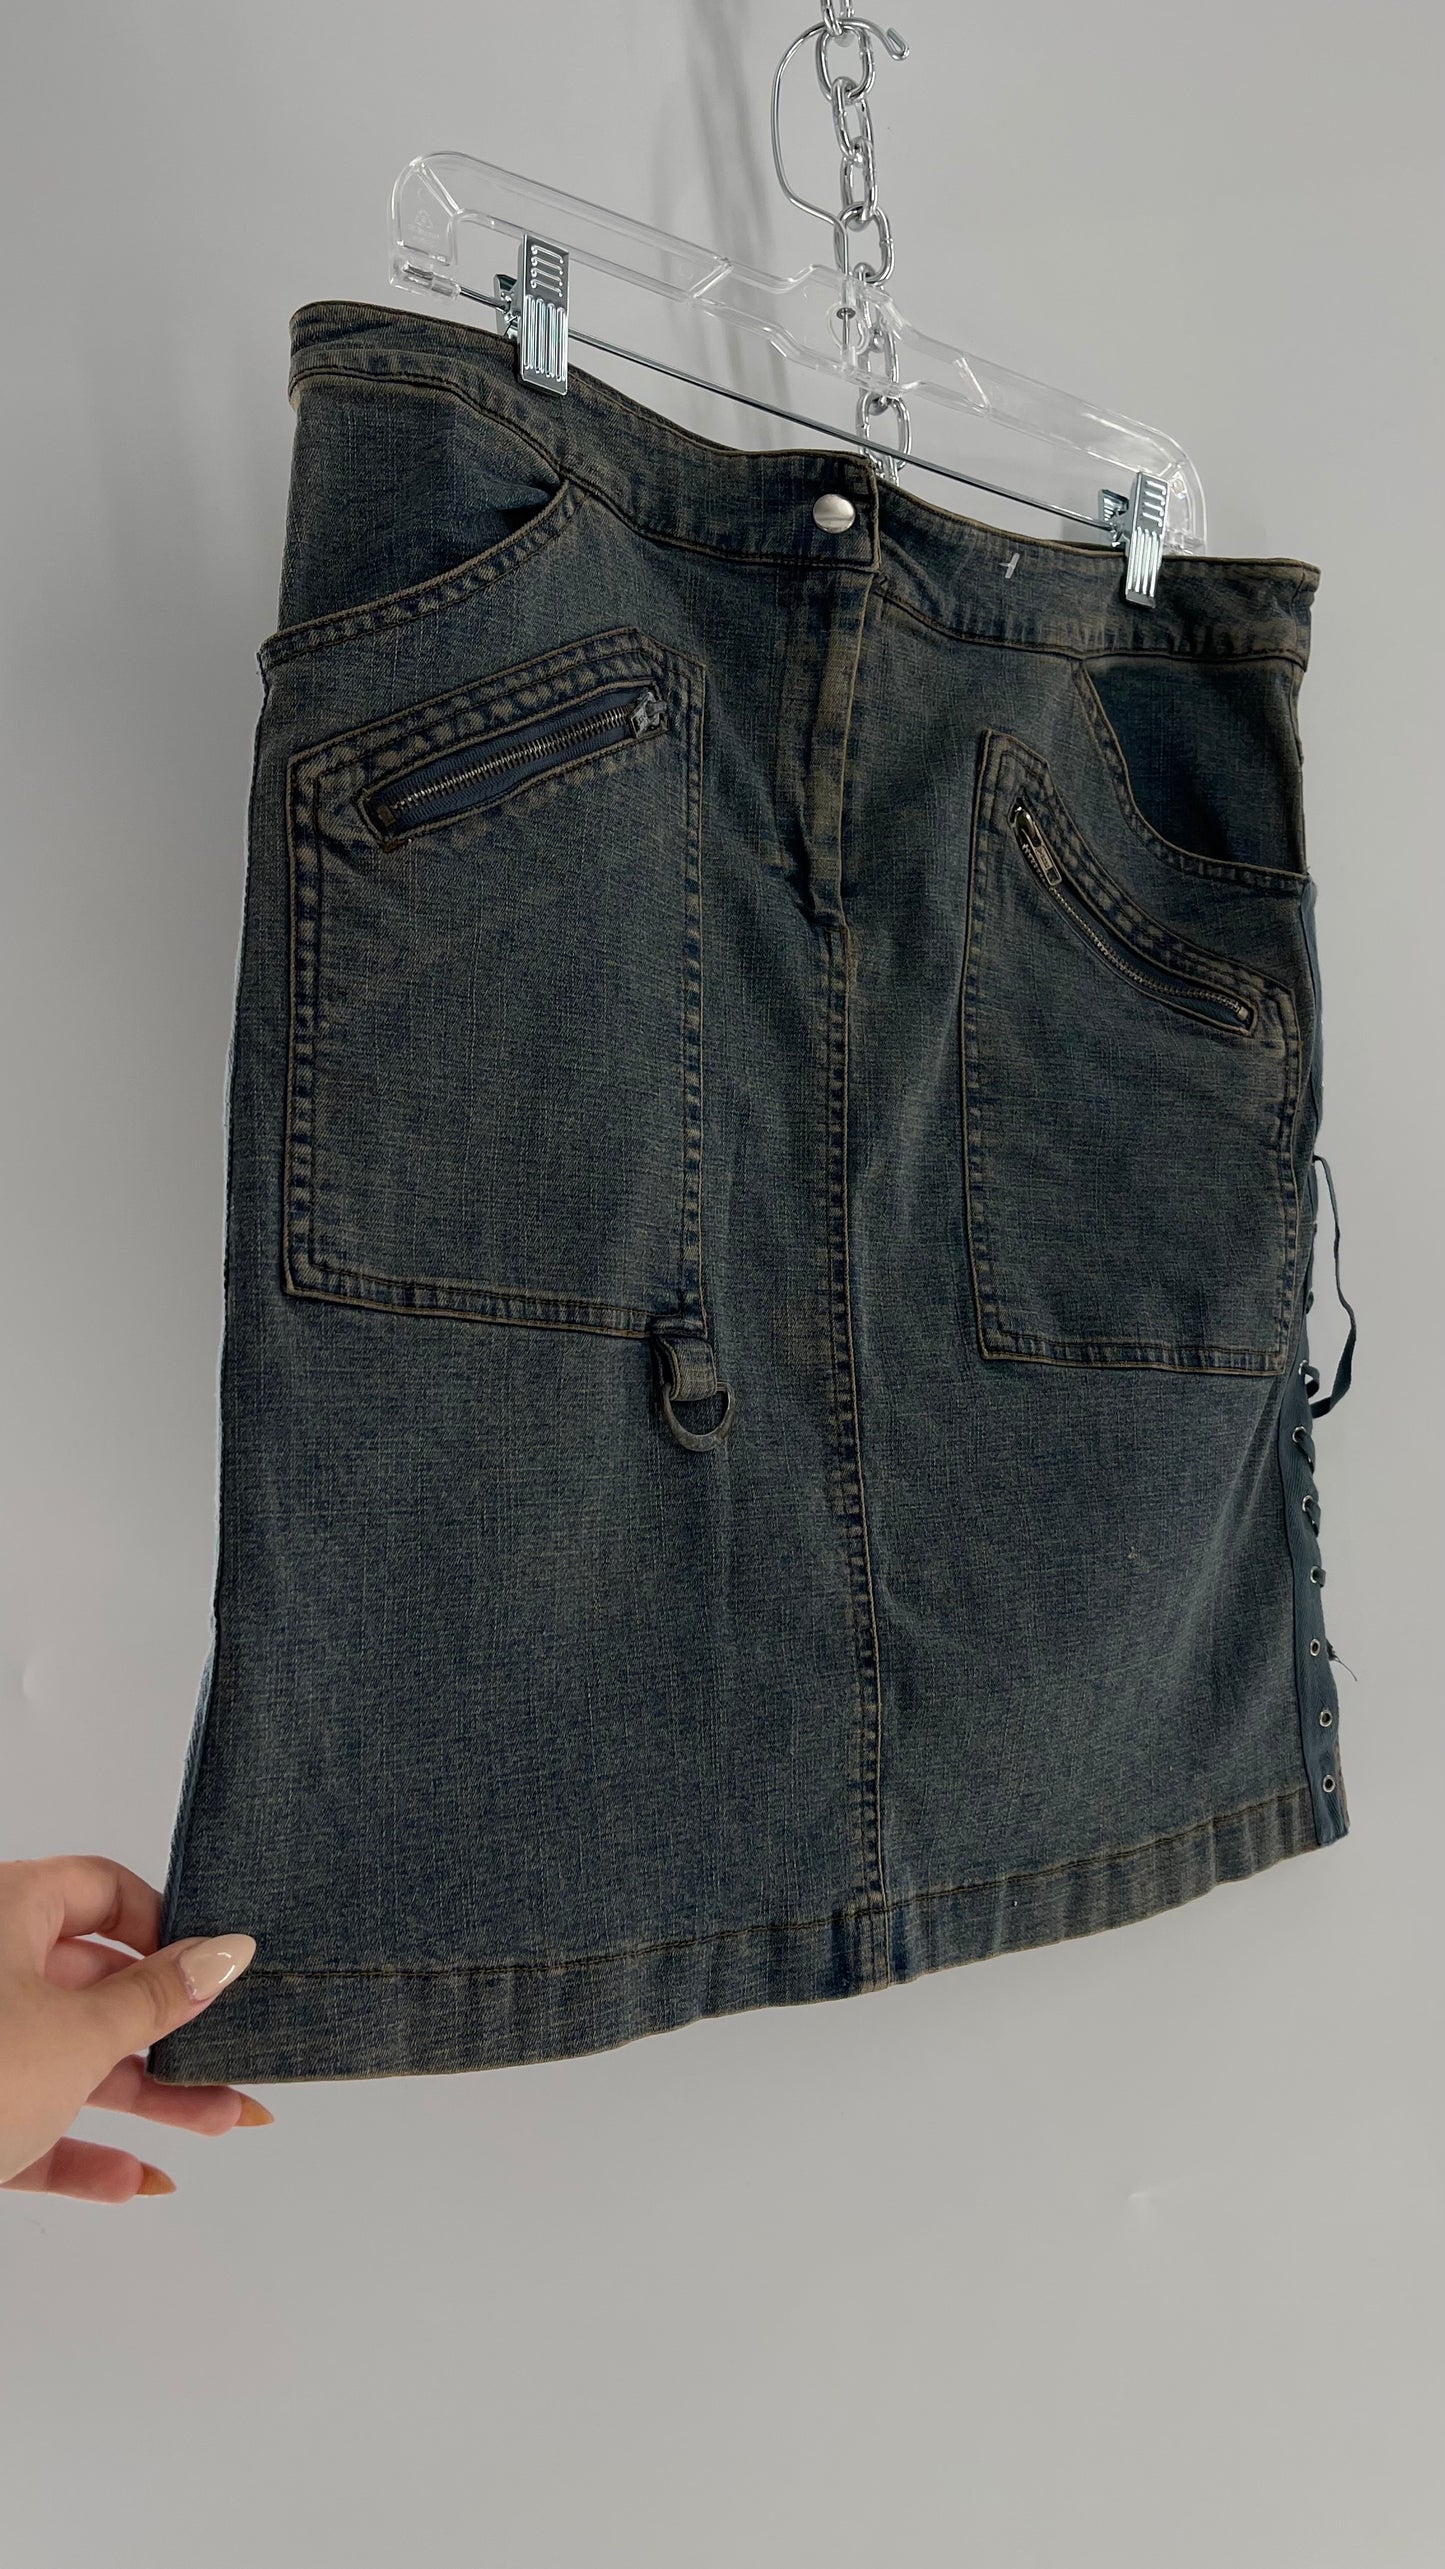 Vintage More Feminine w/o Limits Denim Skirt with Grommet Lace Up Sides and Fade (42)